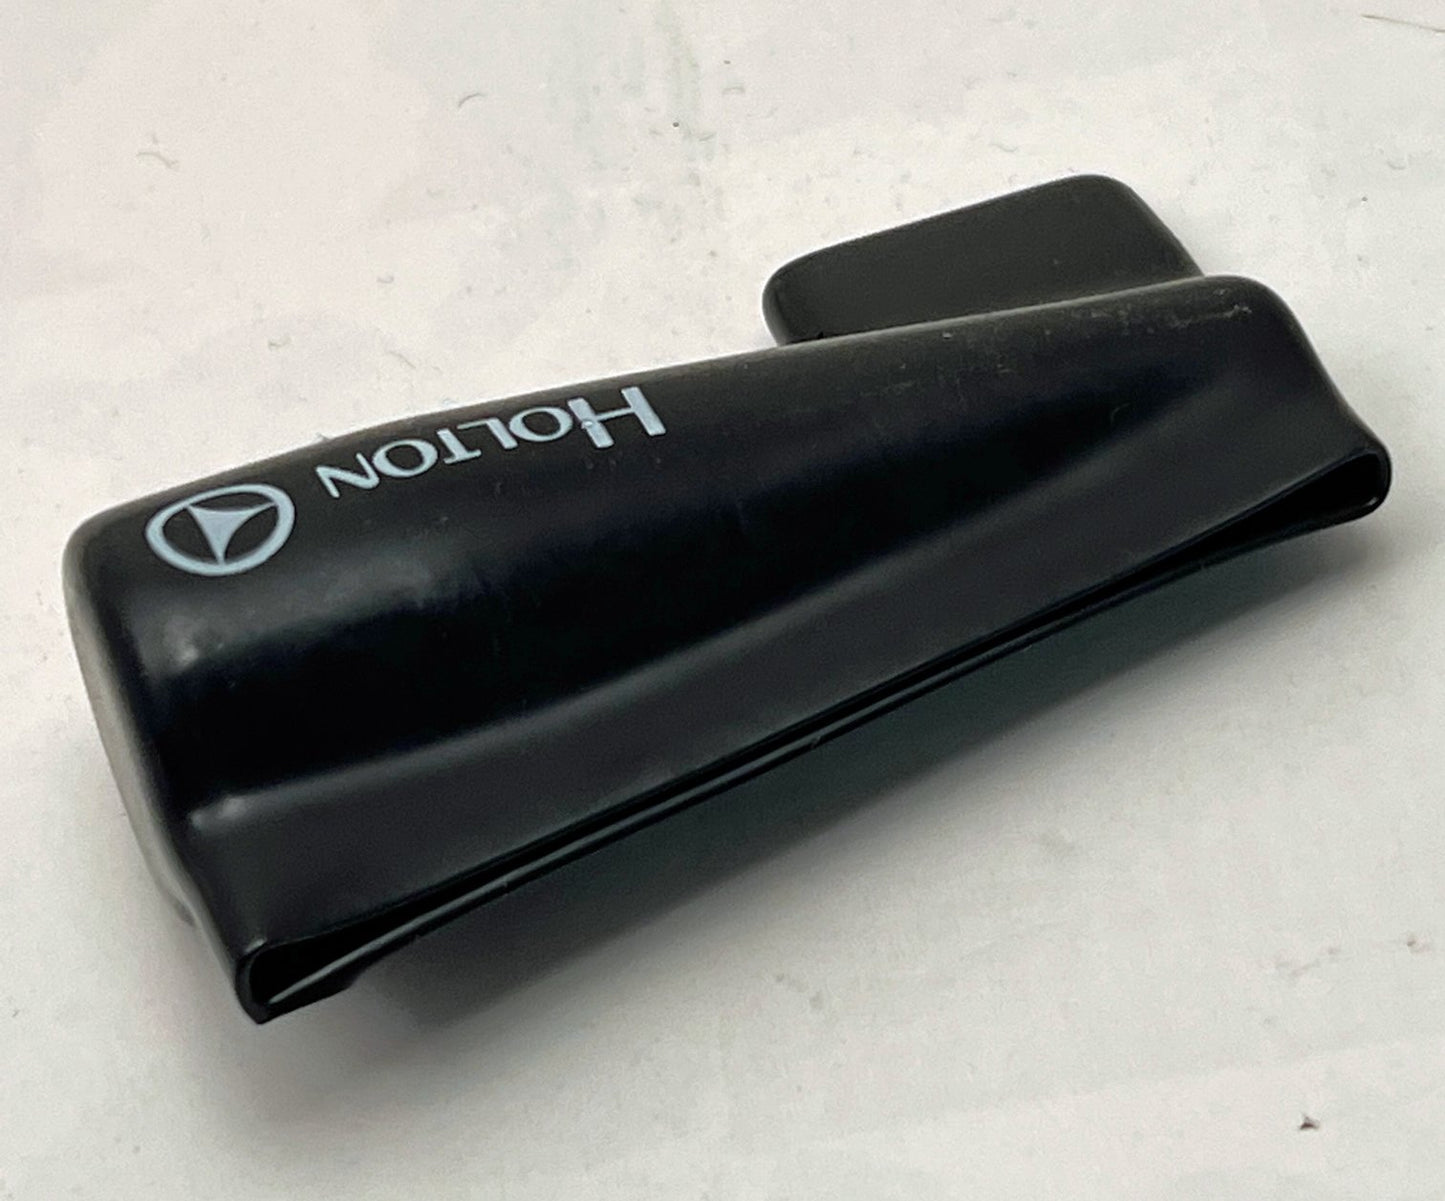 Holton Vinyl Mouthpiece Pouch for Trumpet, Made by Leblanc